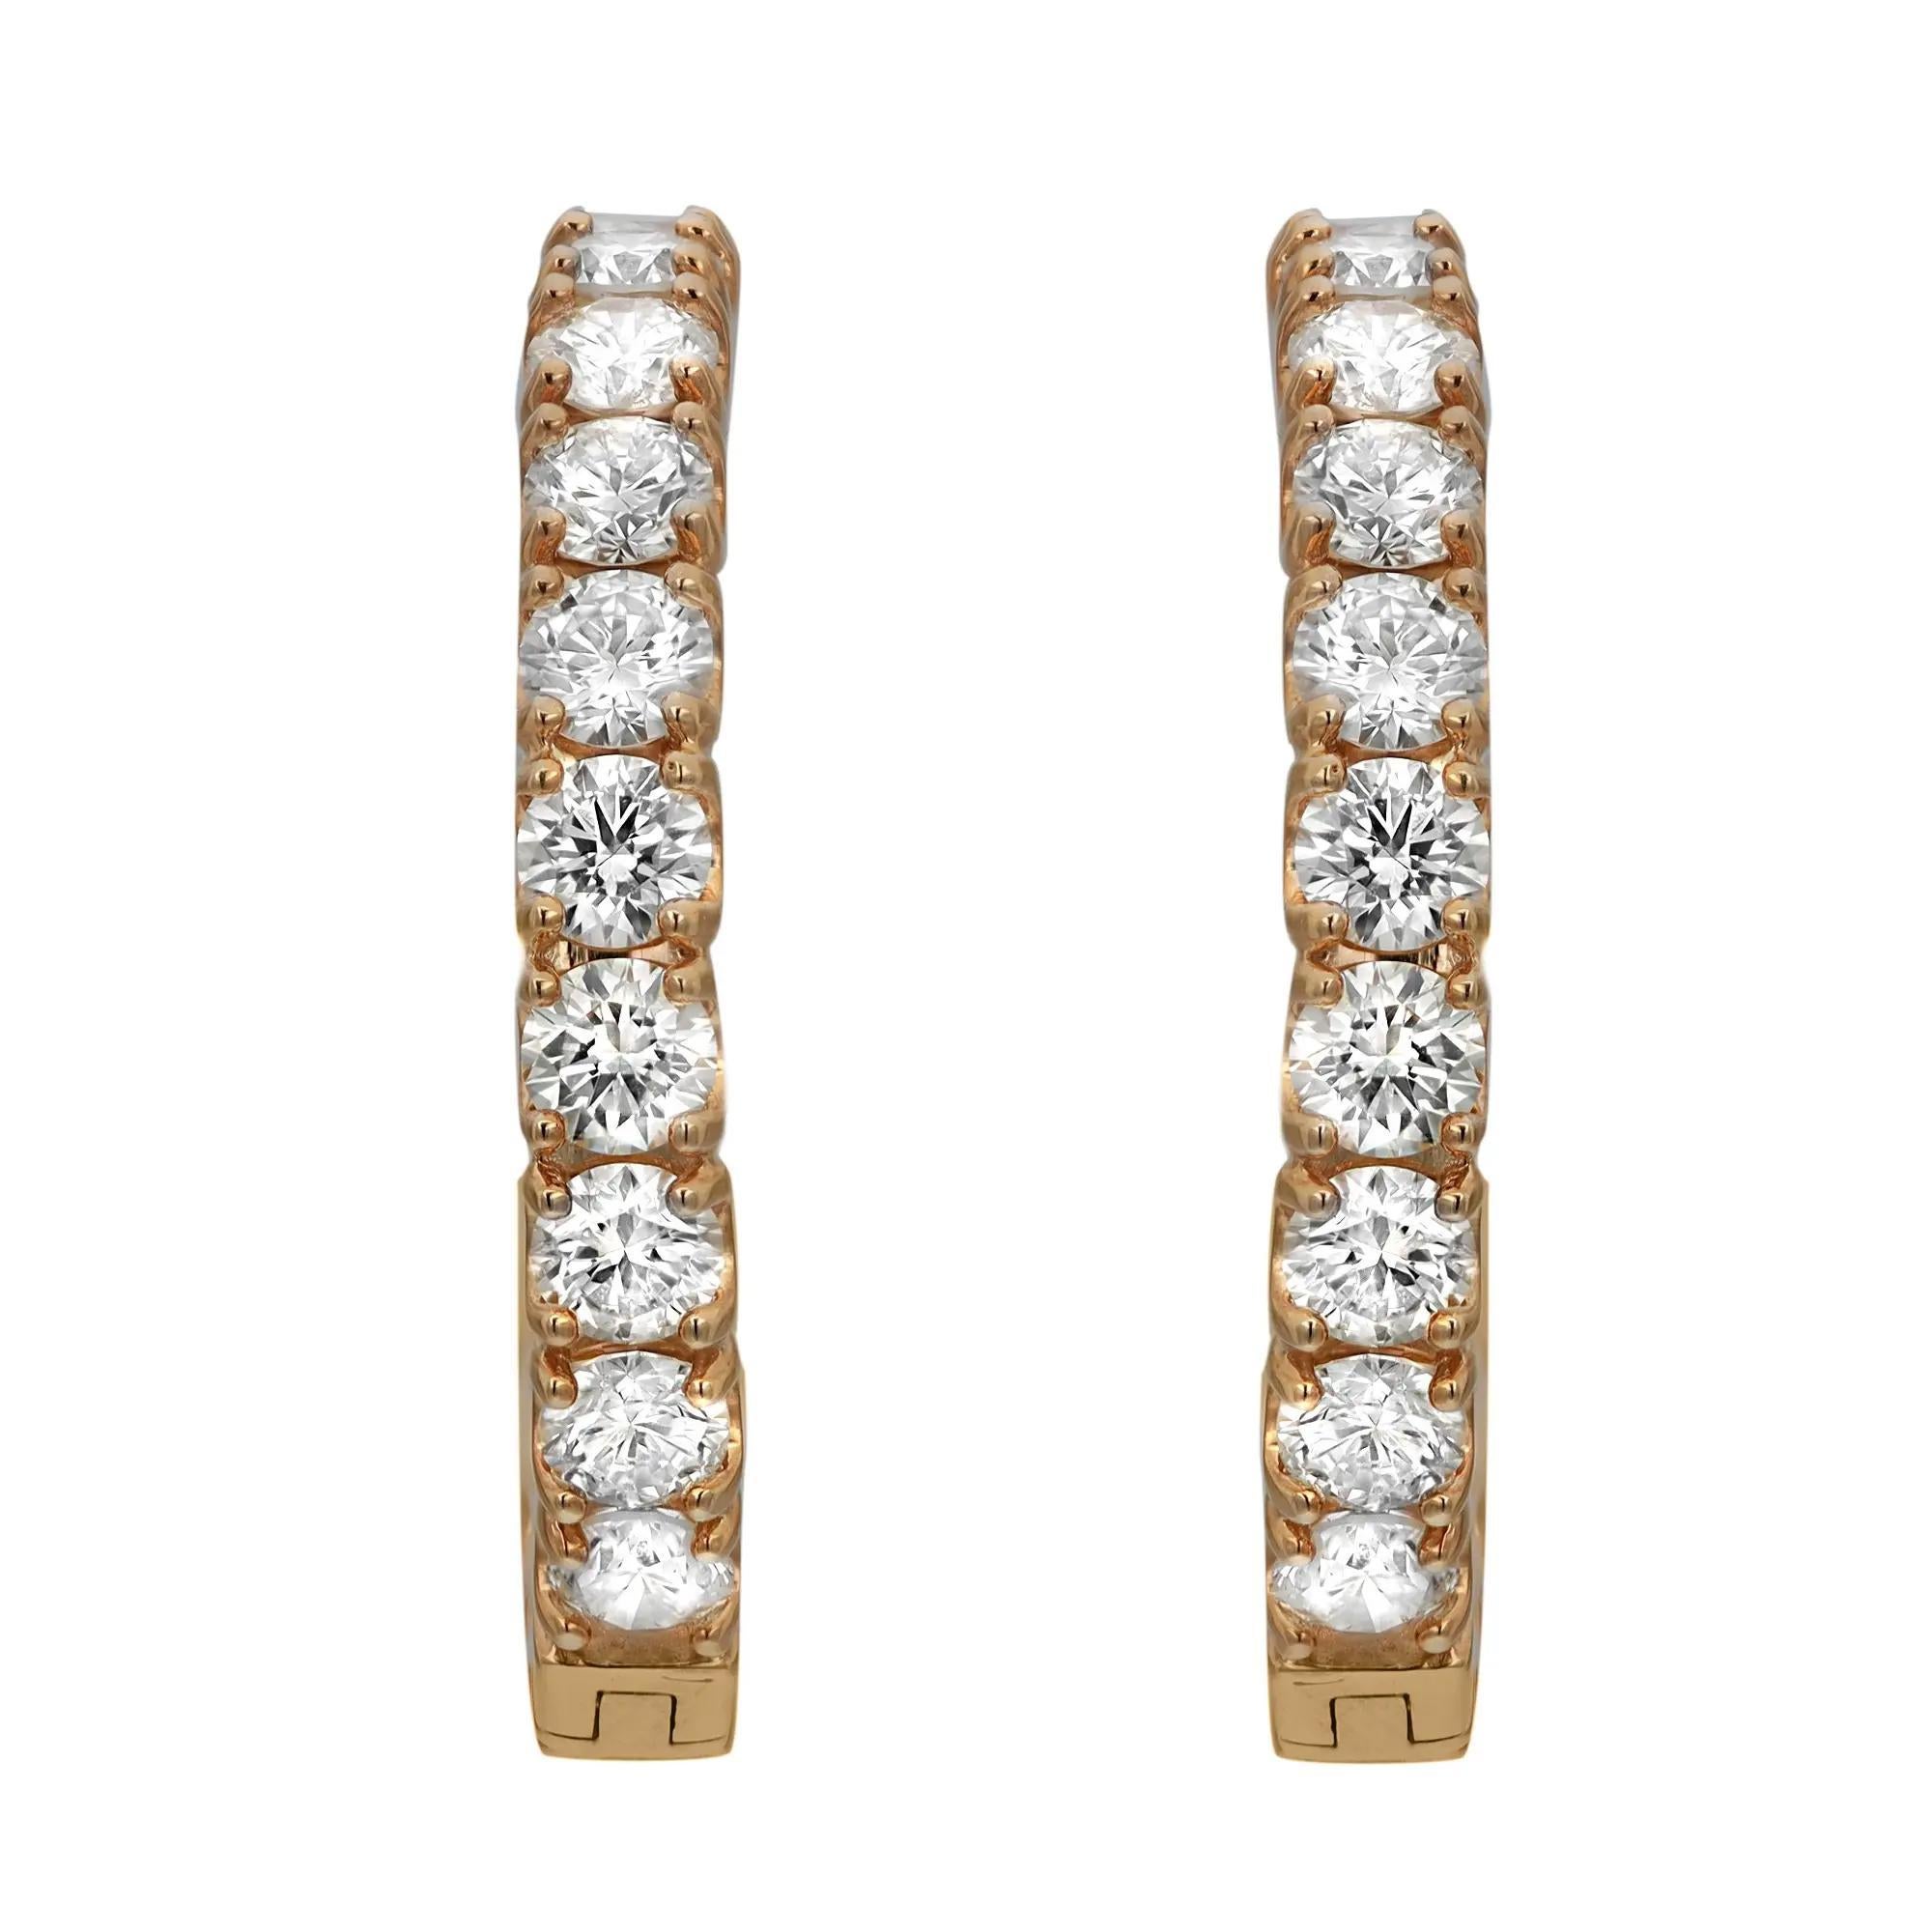 Sparkle all way with these beautiful inside out diamond hoop earrings. Crafted in fine 14K yellow gold. These earrings feature single line prong set dazzling round brilliant cut diamonds weighing 3.19 carats. The diamonds line half of the outer hoop